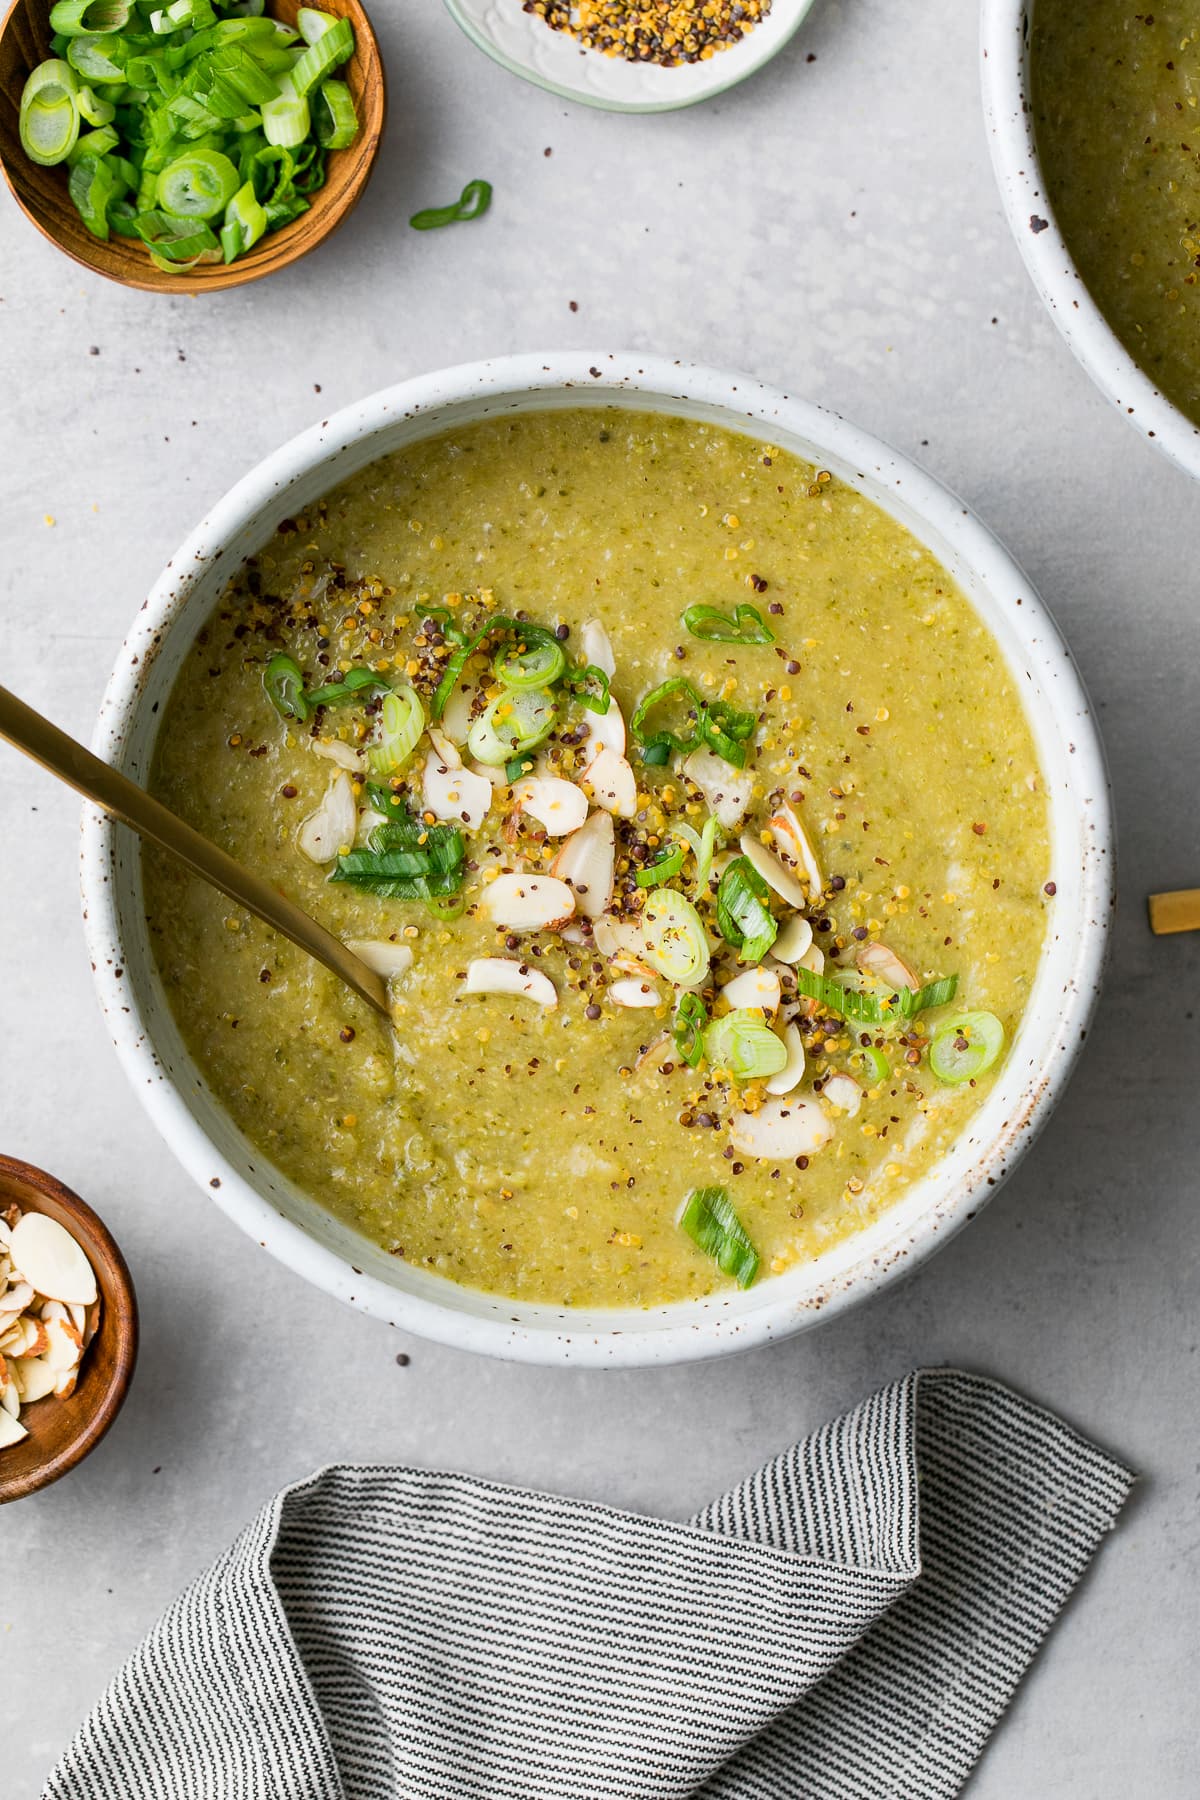 Creamy Broccoli and Red Lentil Soup